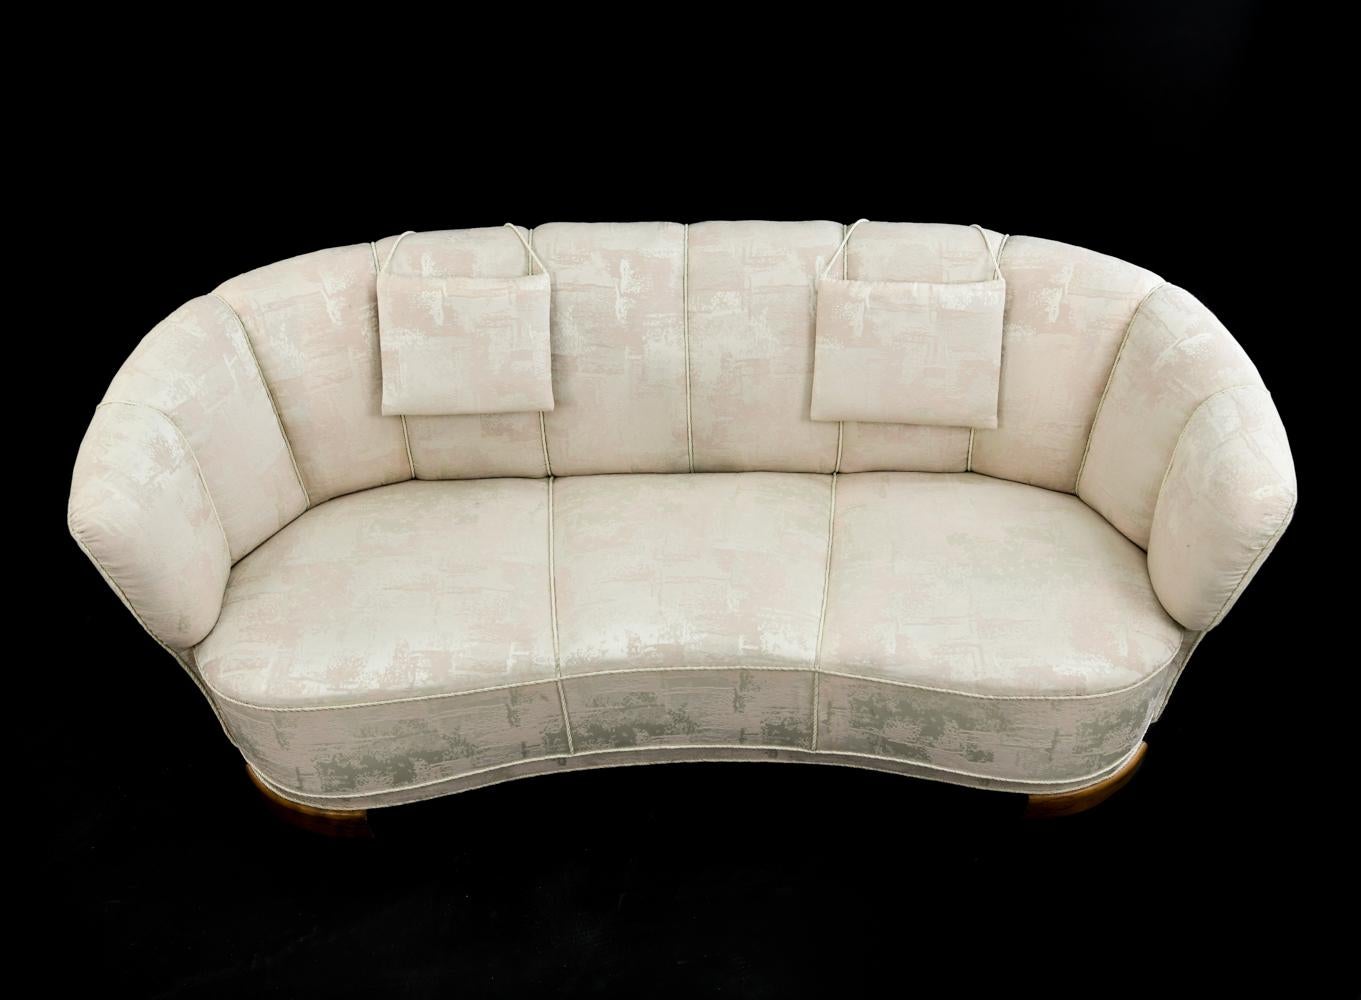 A beautiful 1940s banana form sofa made by Slagelse Møbelvaerk. This Art Deco sofa is a great piece of early Danish Mid-Century Modern design and production. This voluptuous sofa epitomizes comfort and style with curved lines and two weighted,